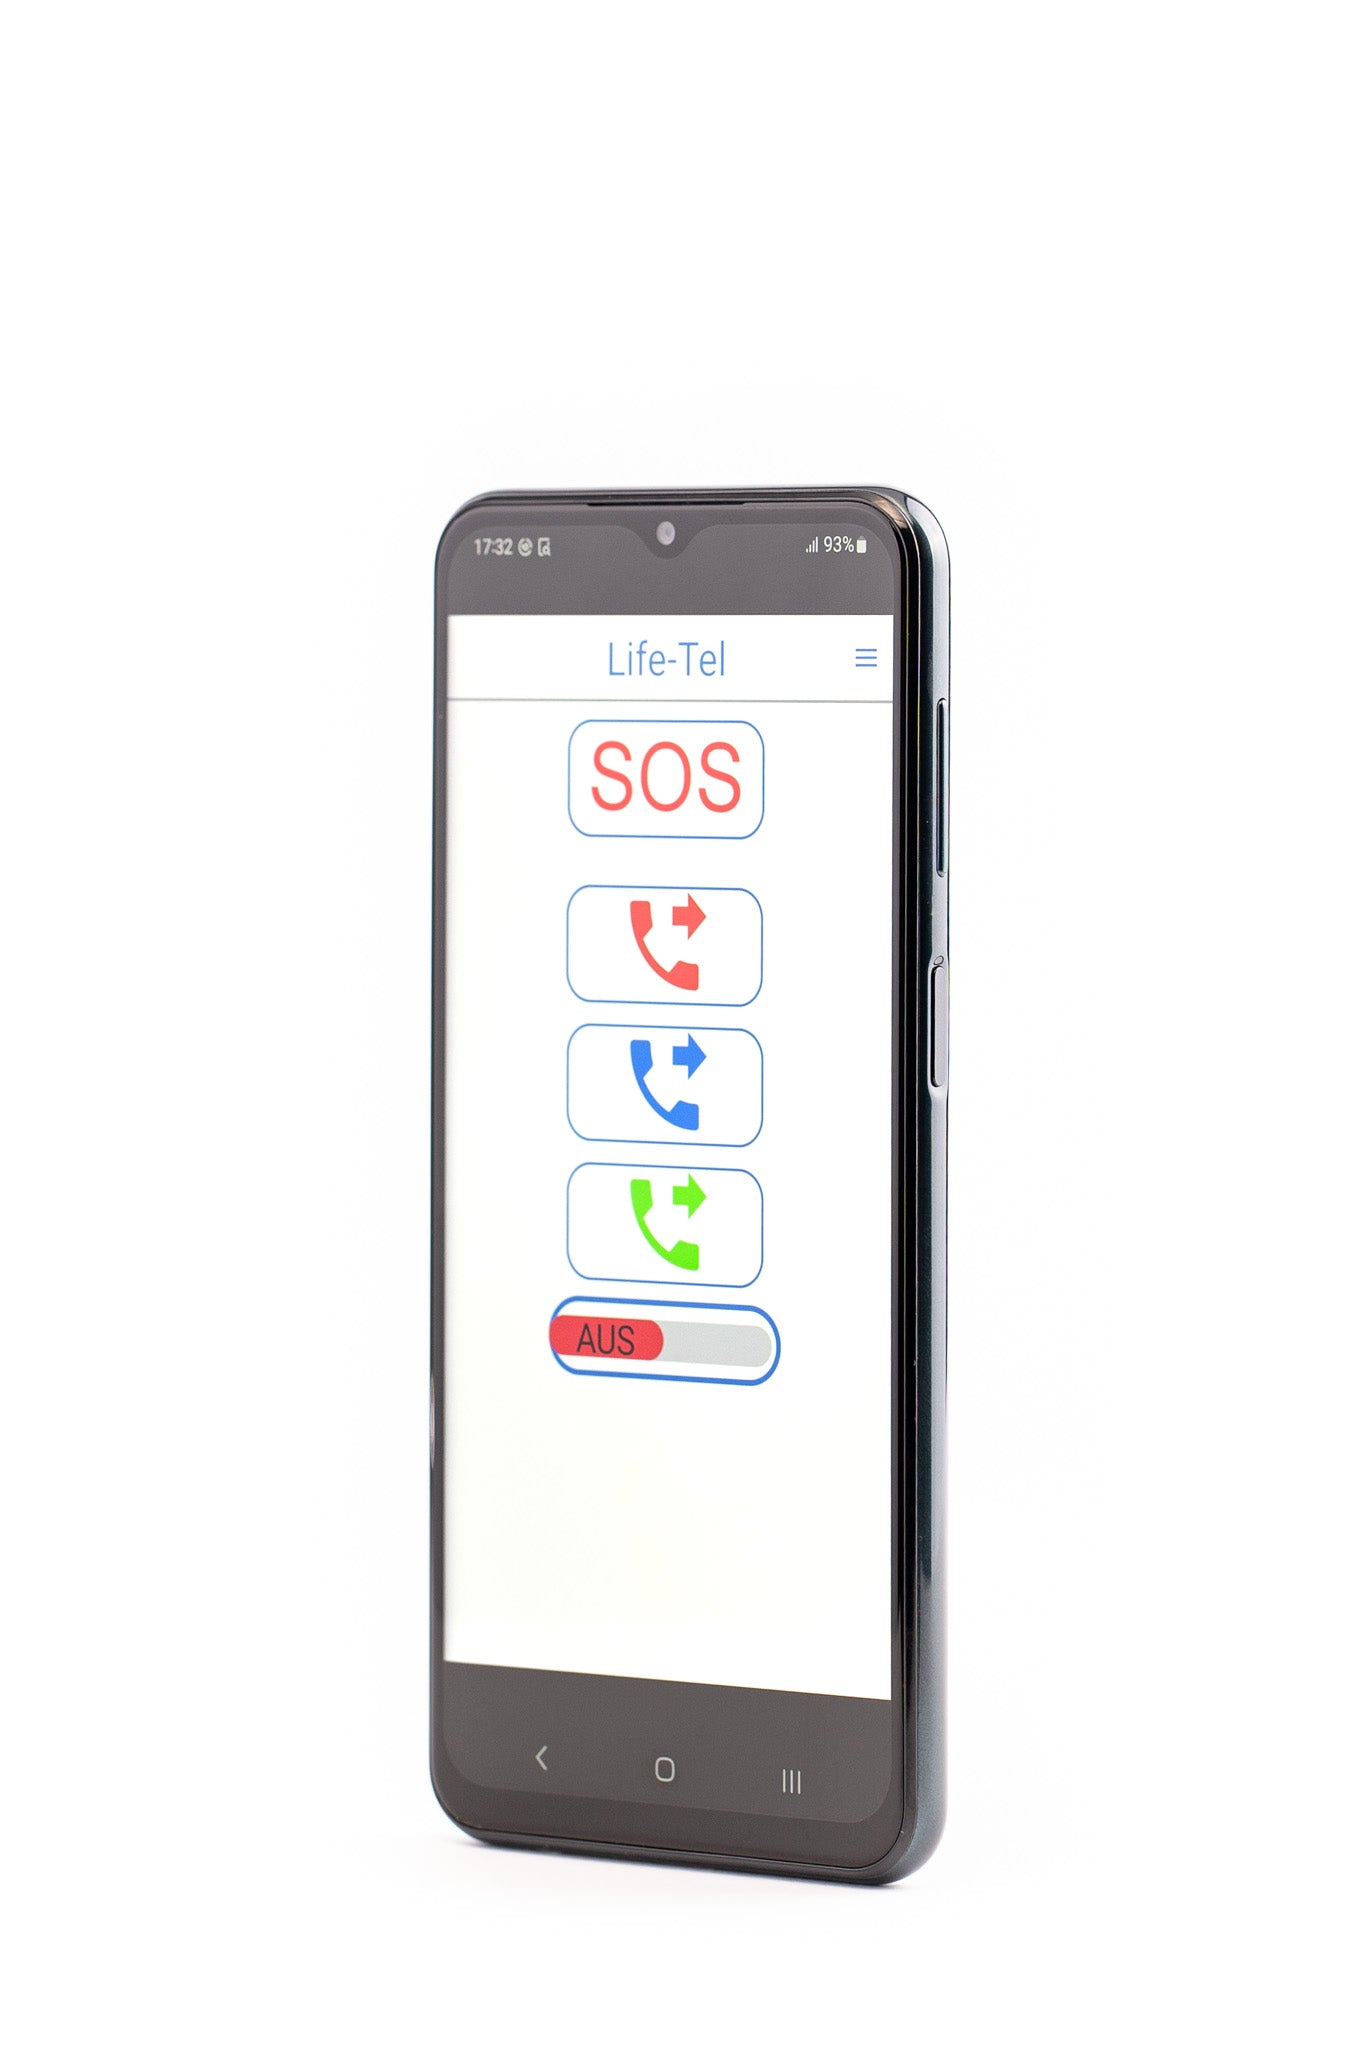 Life Tel 7 L - 5G smartphone as personal emergency signal system for lone work including emergency call app